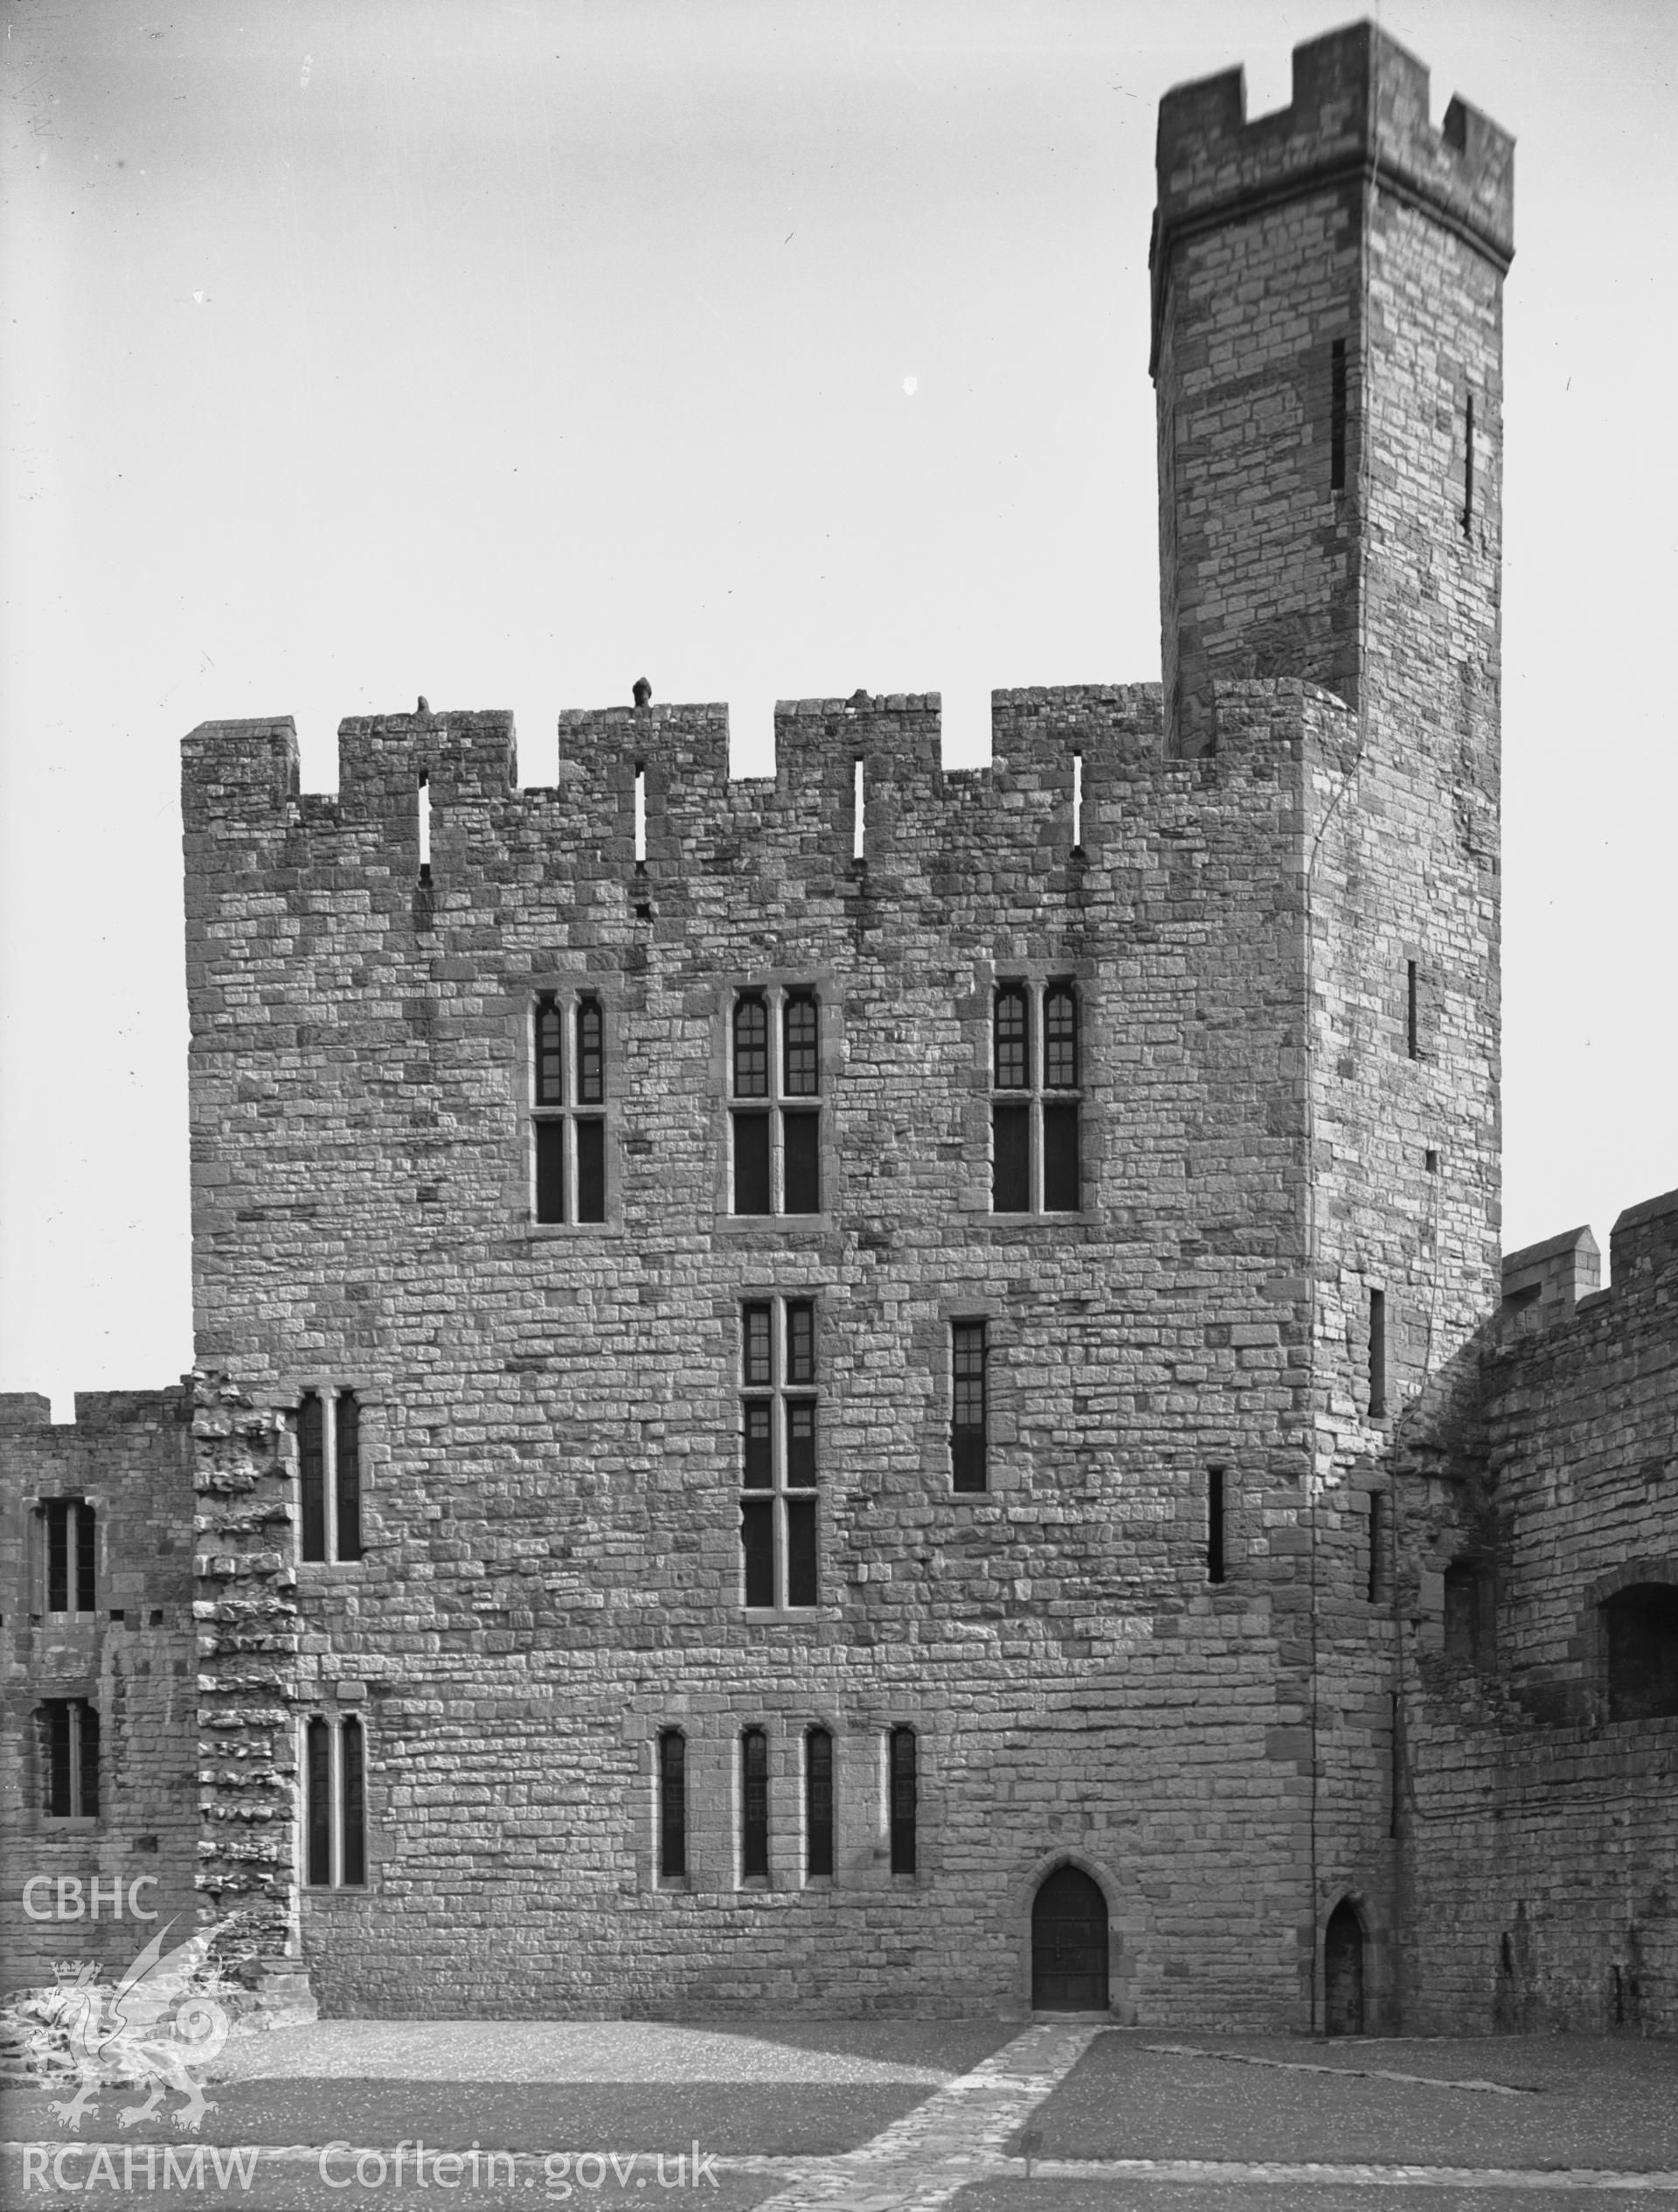 The Queen's Tower on the inner bailey.